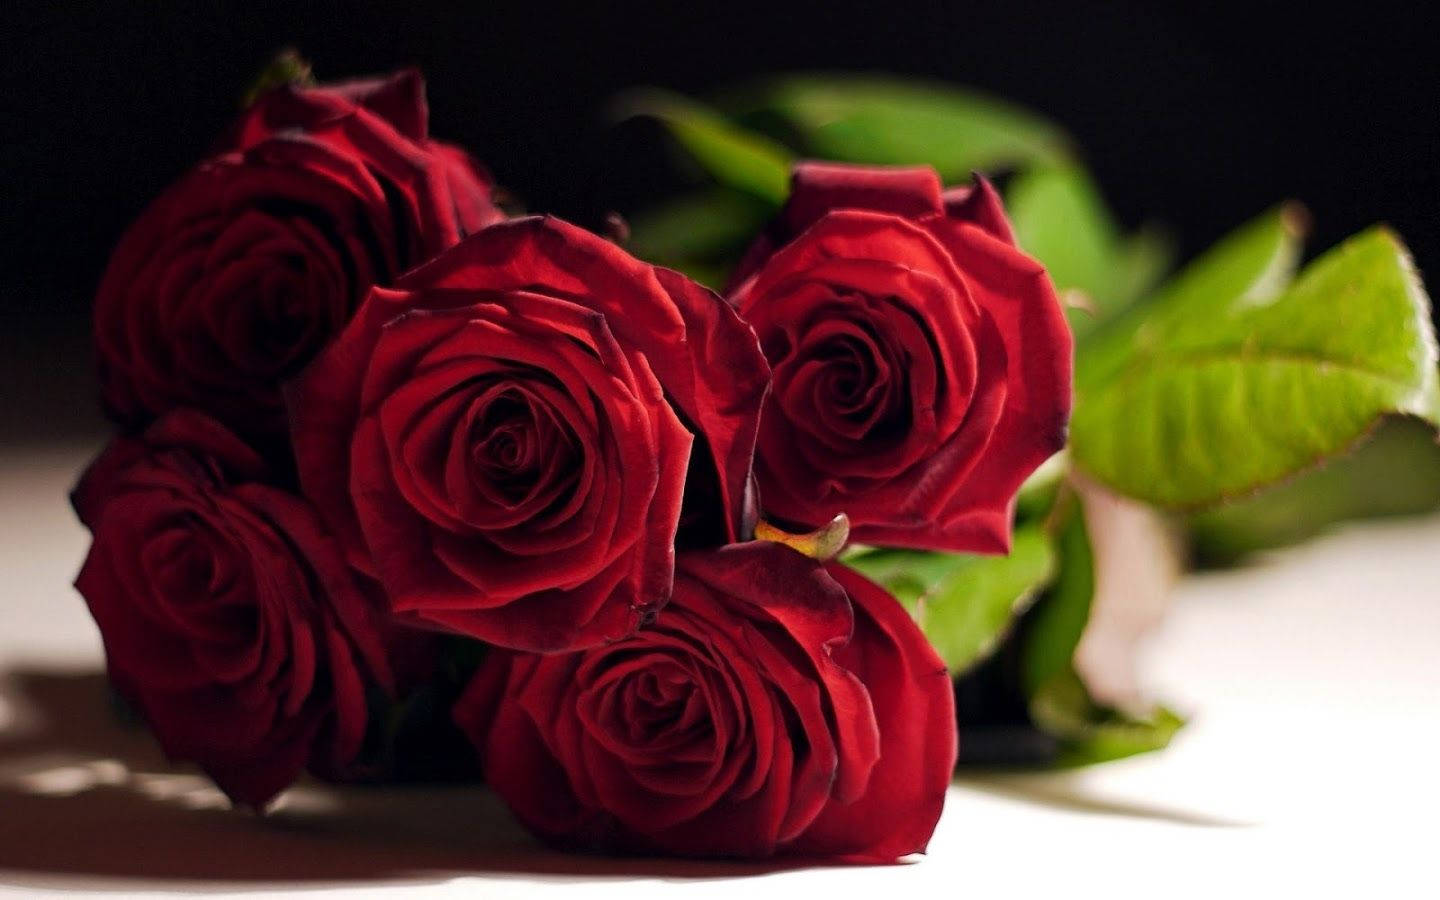 Flowers Red Rose Wallpaper - Awesome